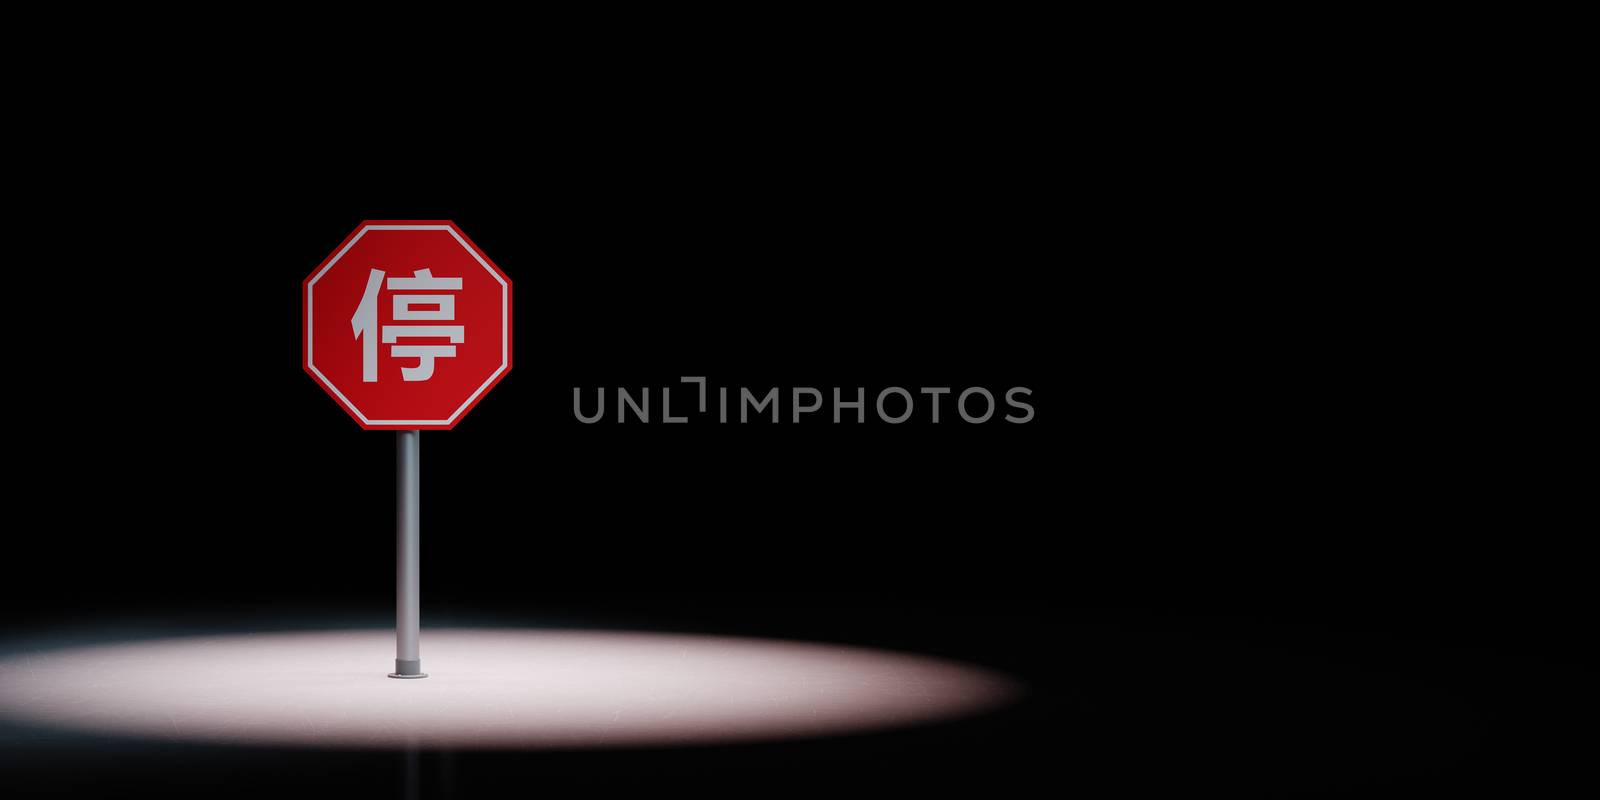 Chinese Stop Road Sign Spotlighted on Black Background by make